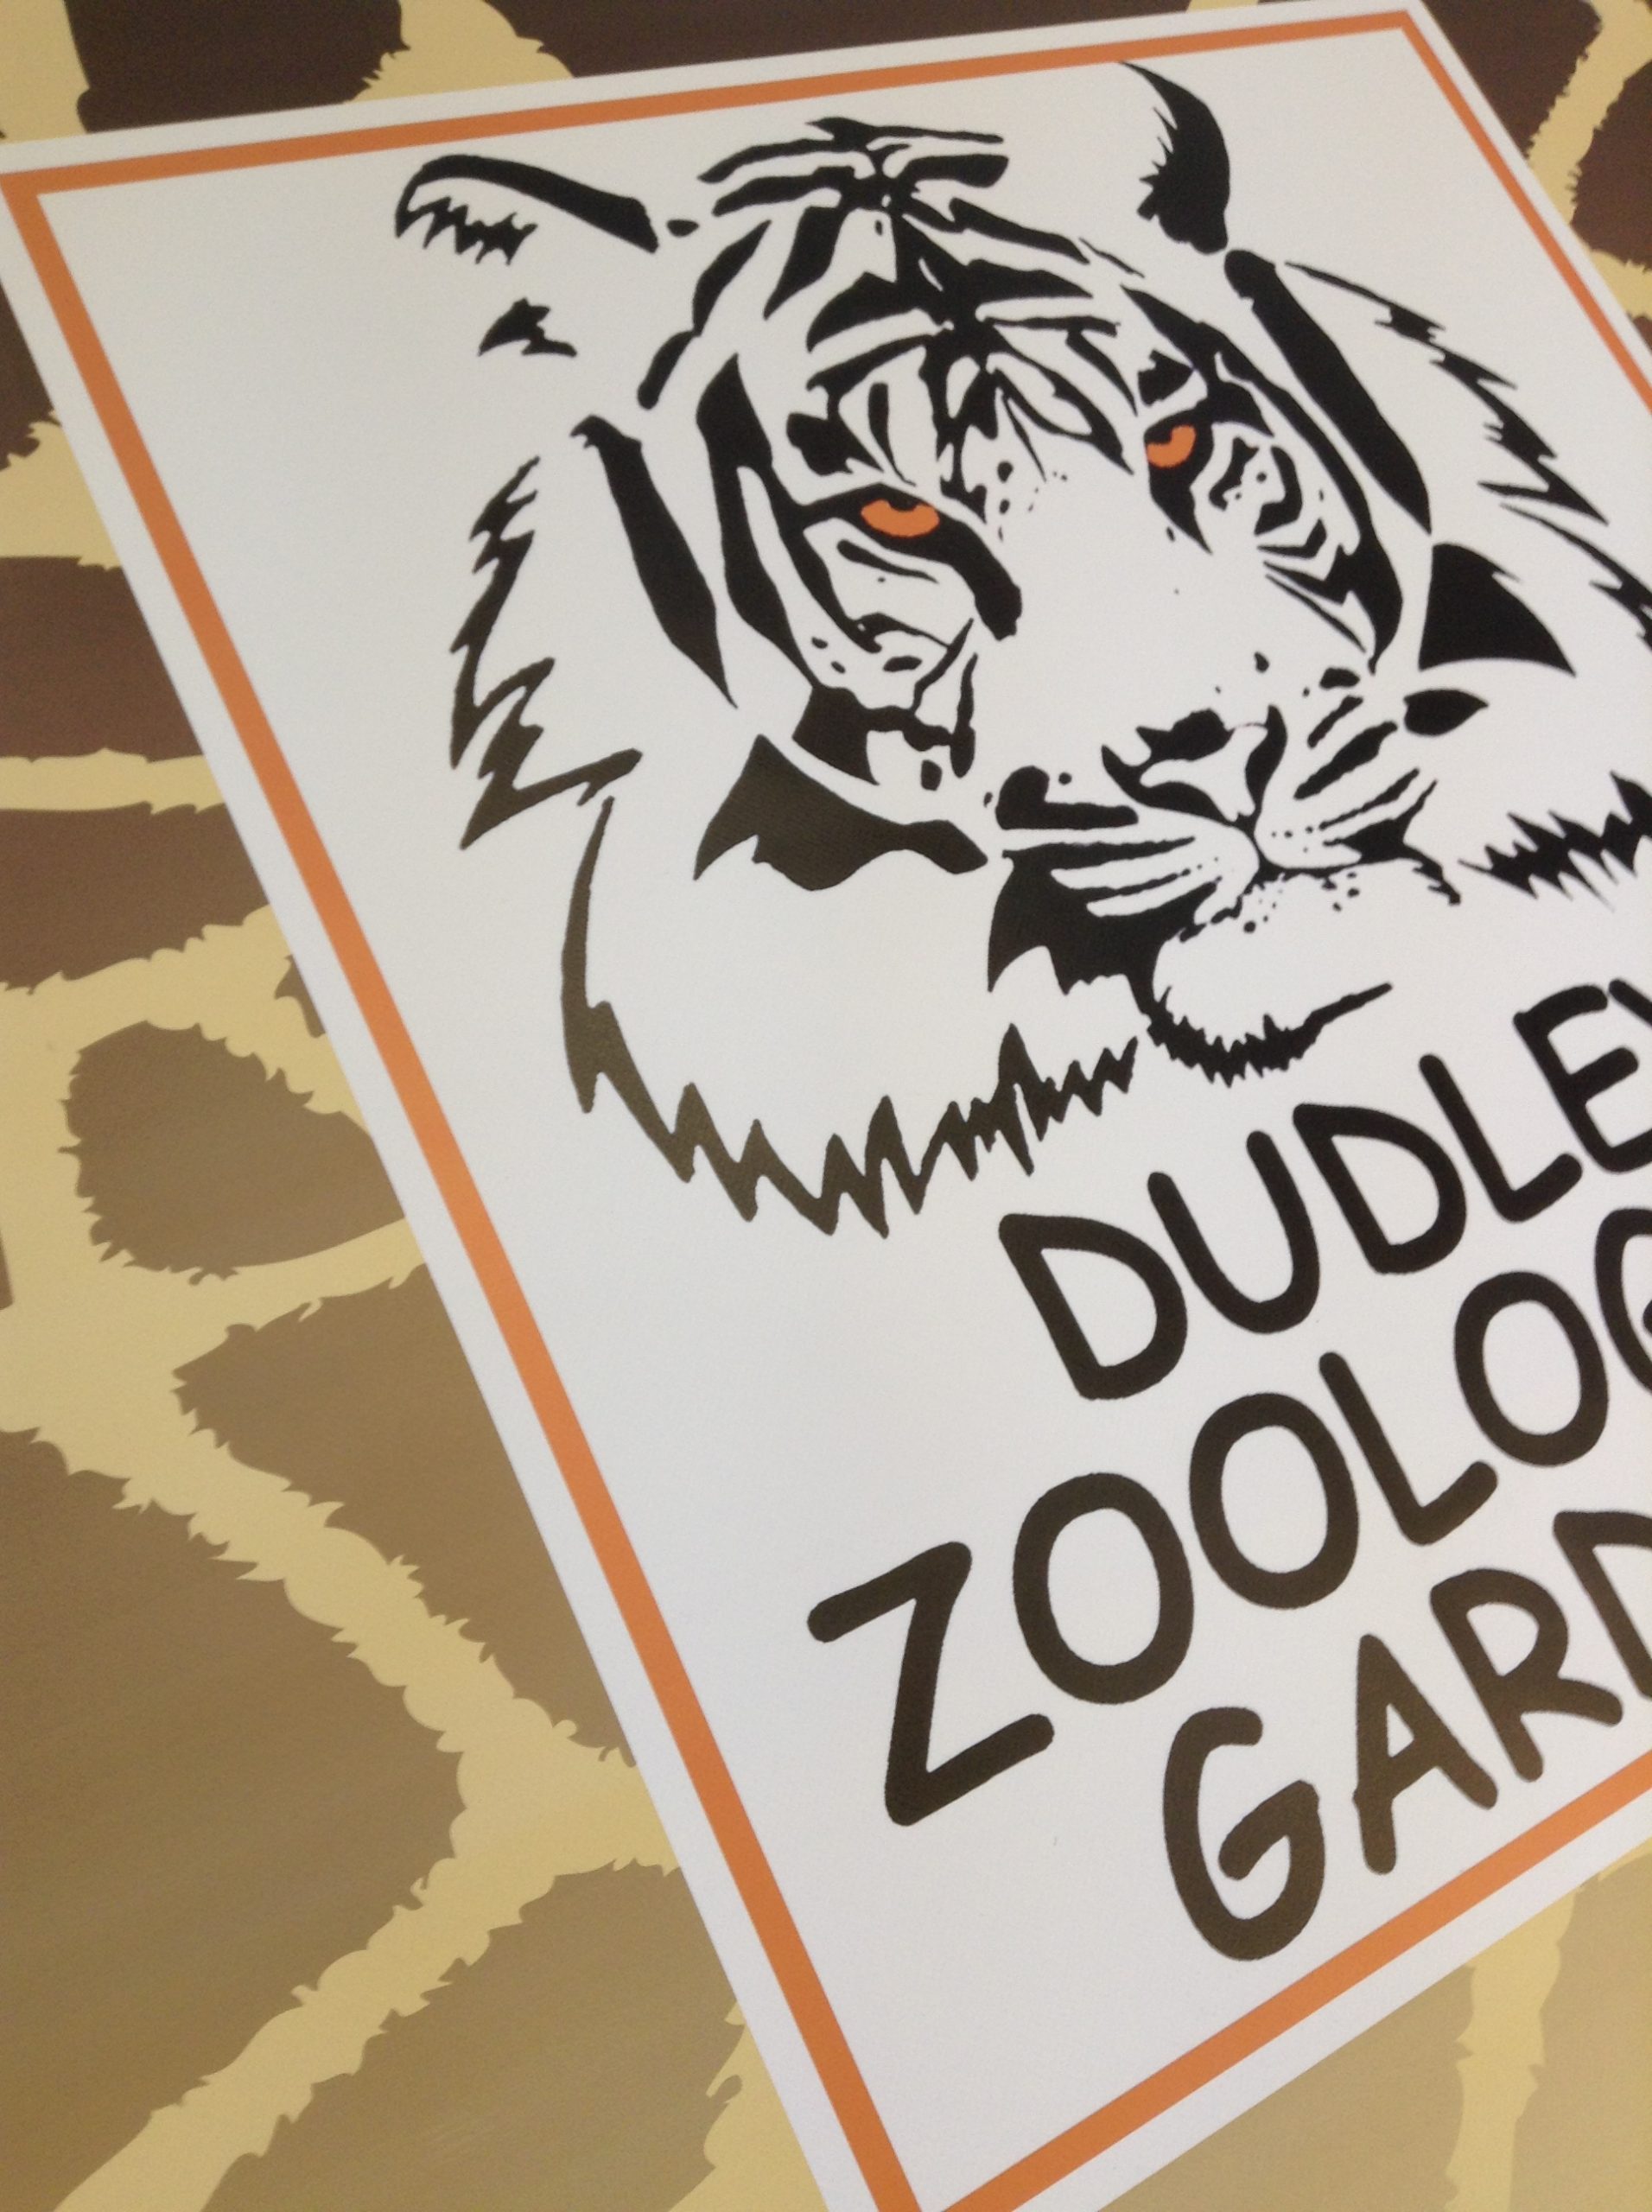 Dudley Zoo - PVC Banners